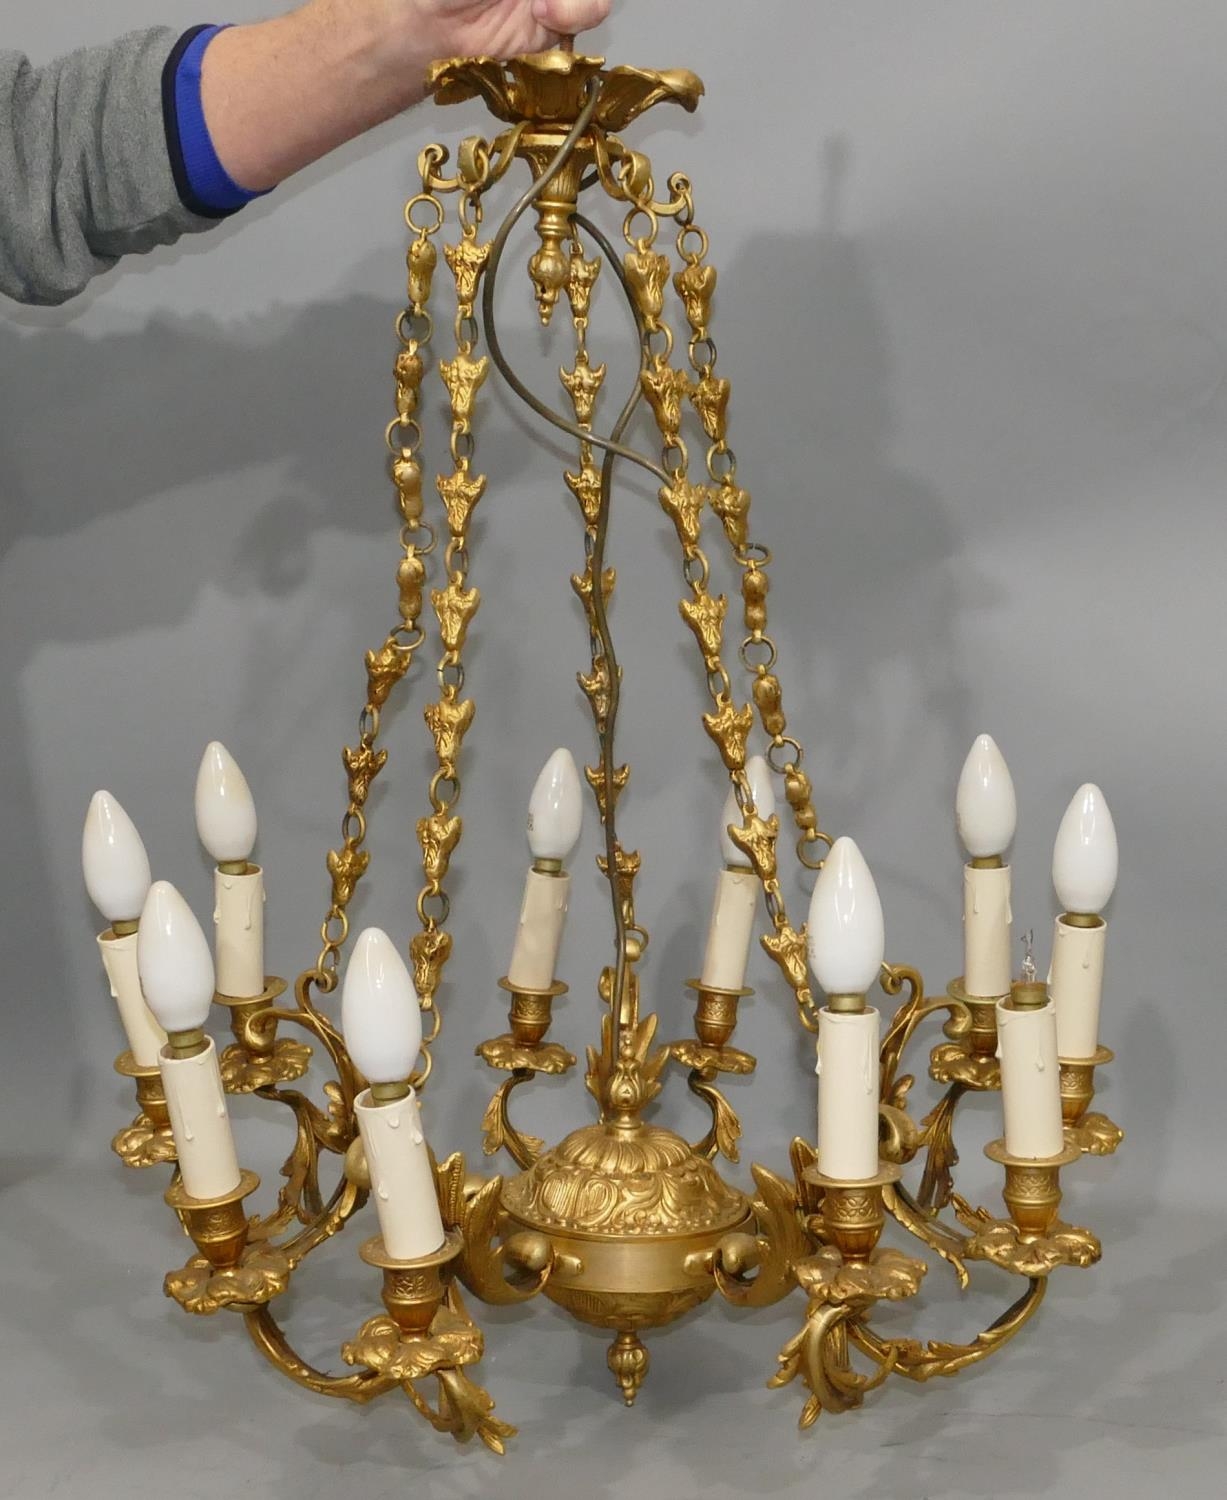 French Chandelier Highly Ornate Detail With Gold Gilt Over Bronze In The Louis XVI Style.